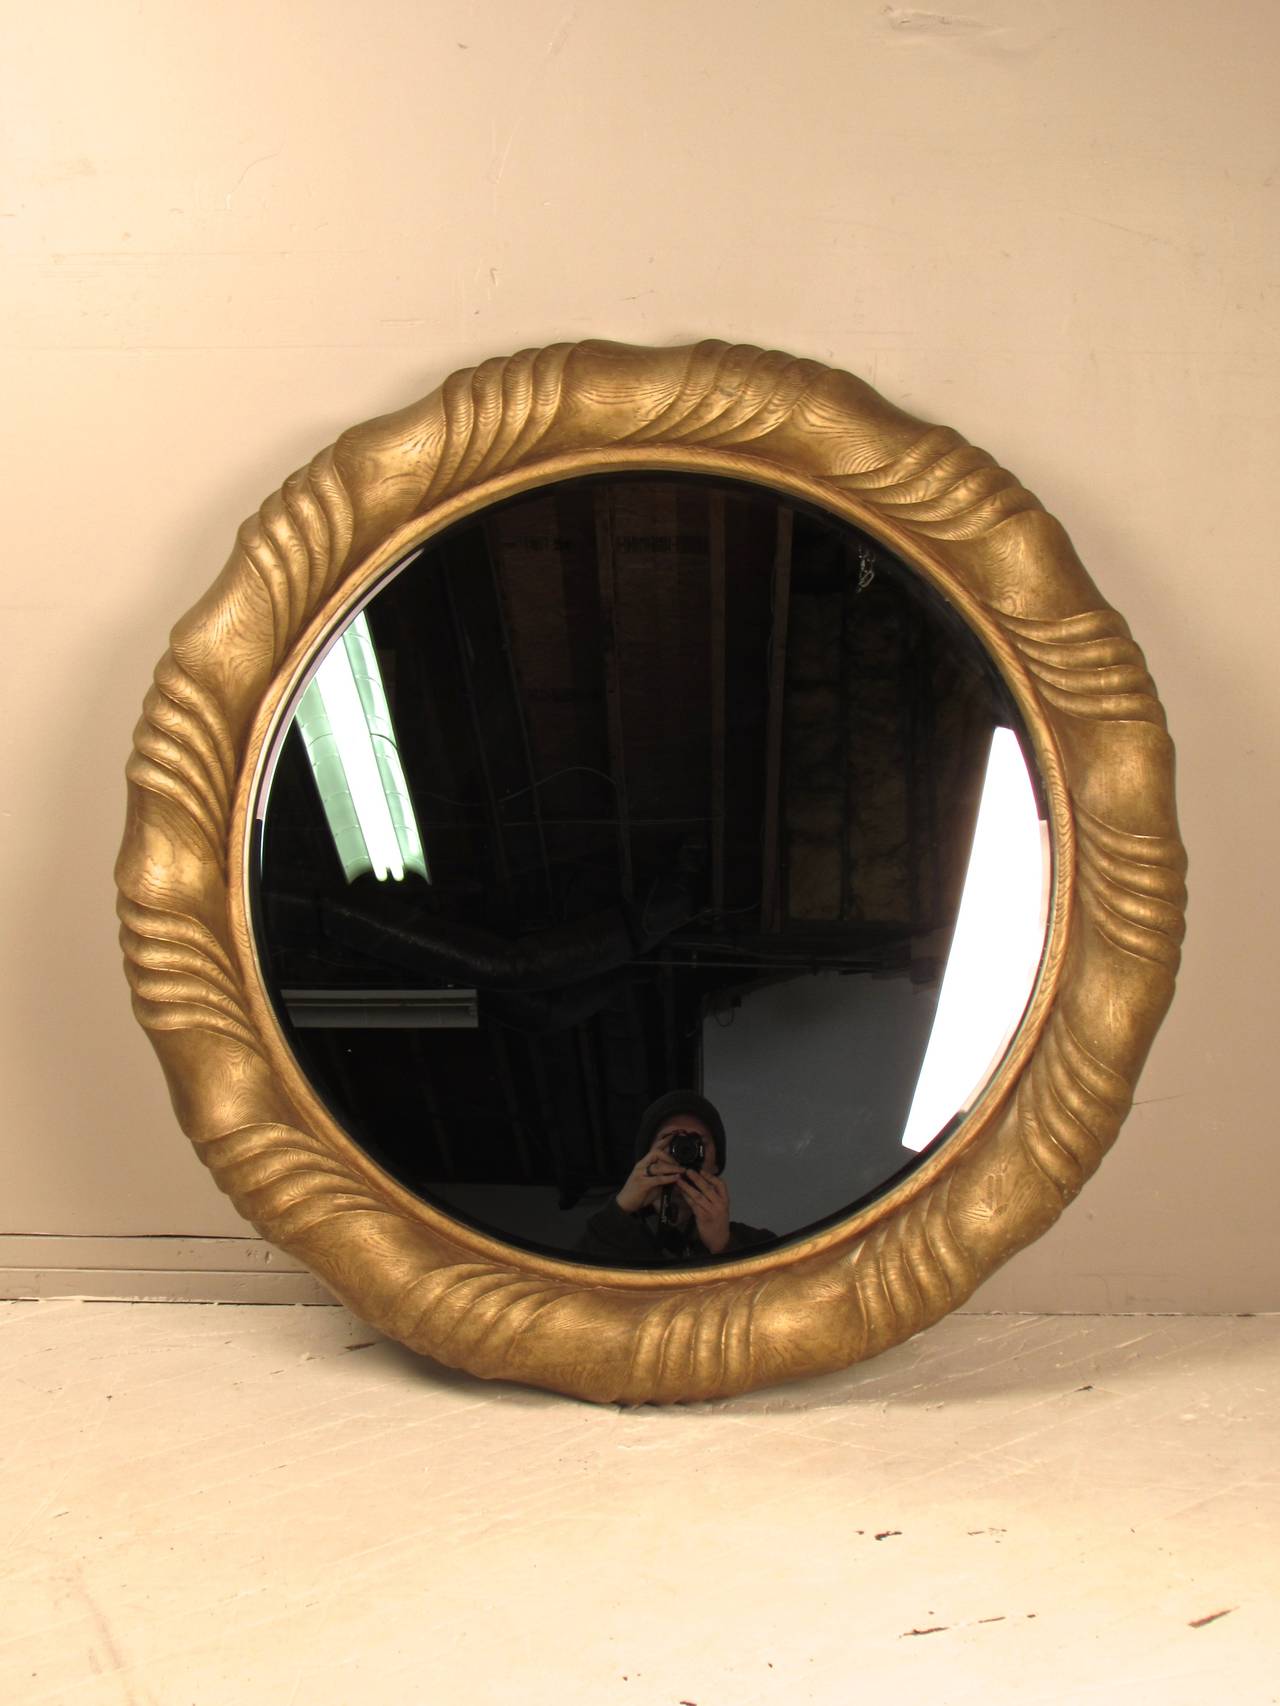 Monumental, nearly 4 feet in diameter, round wall mirror. with beveled edge. Constructed of thick cast and sculpted resin which has a woodgrain texture and gilded finish. The wood grain is so convincing that it truly looks like wood, even at close